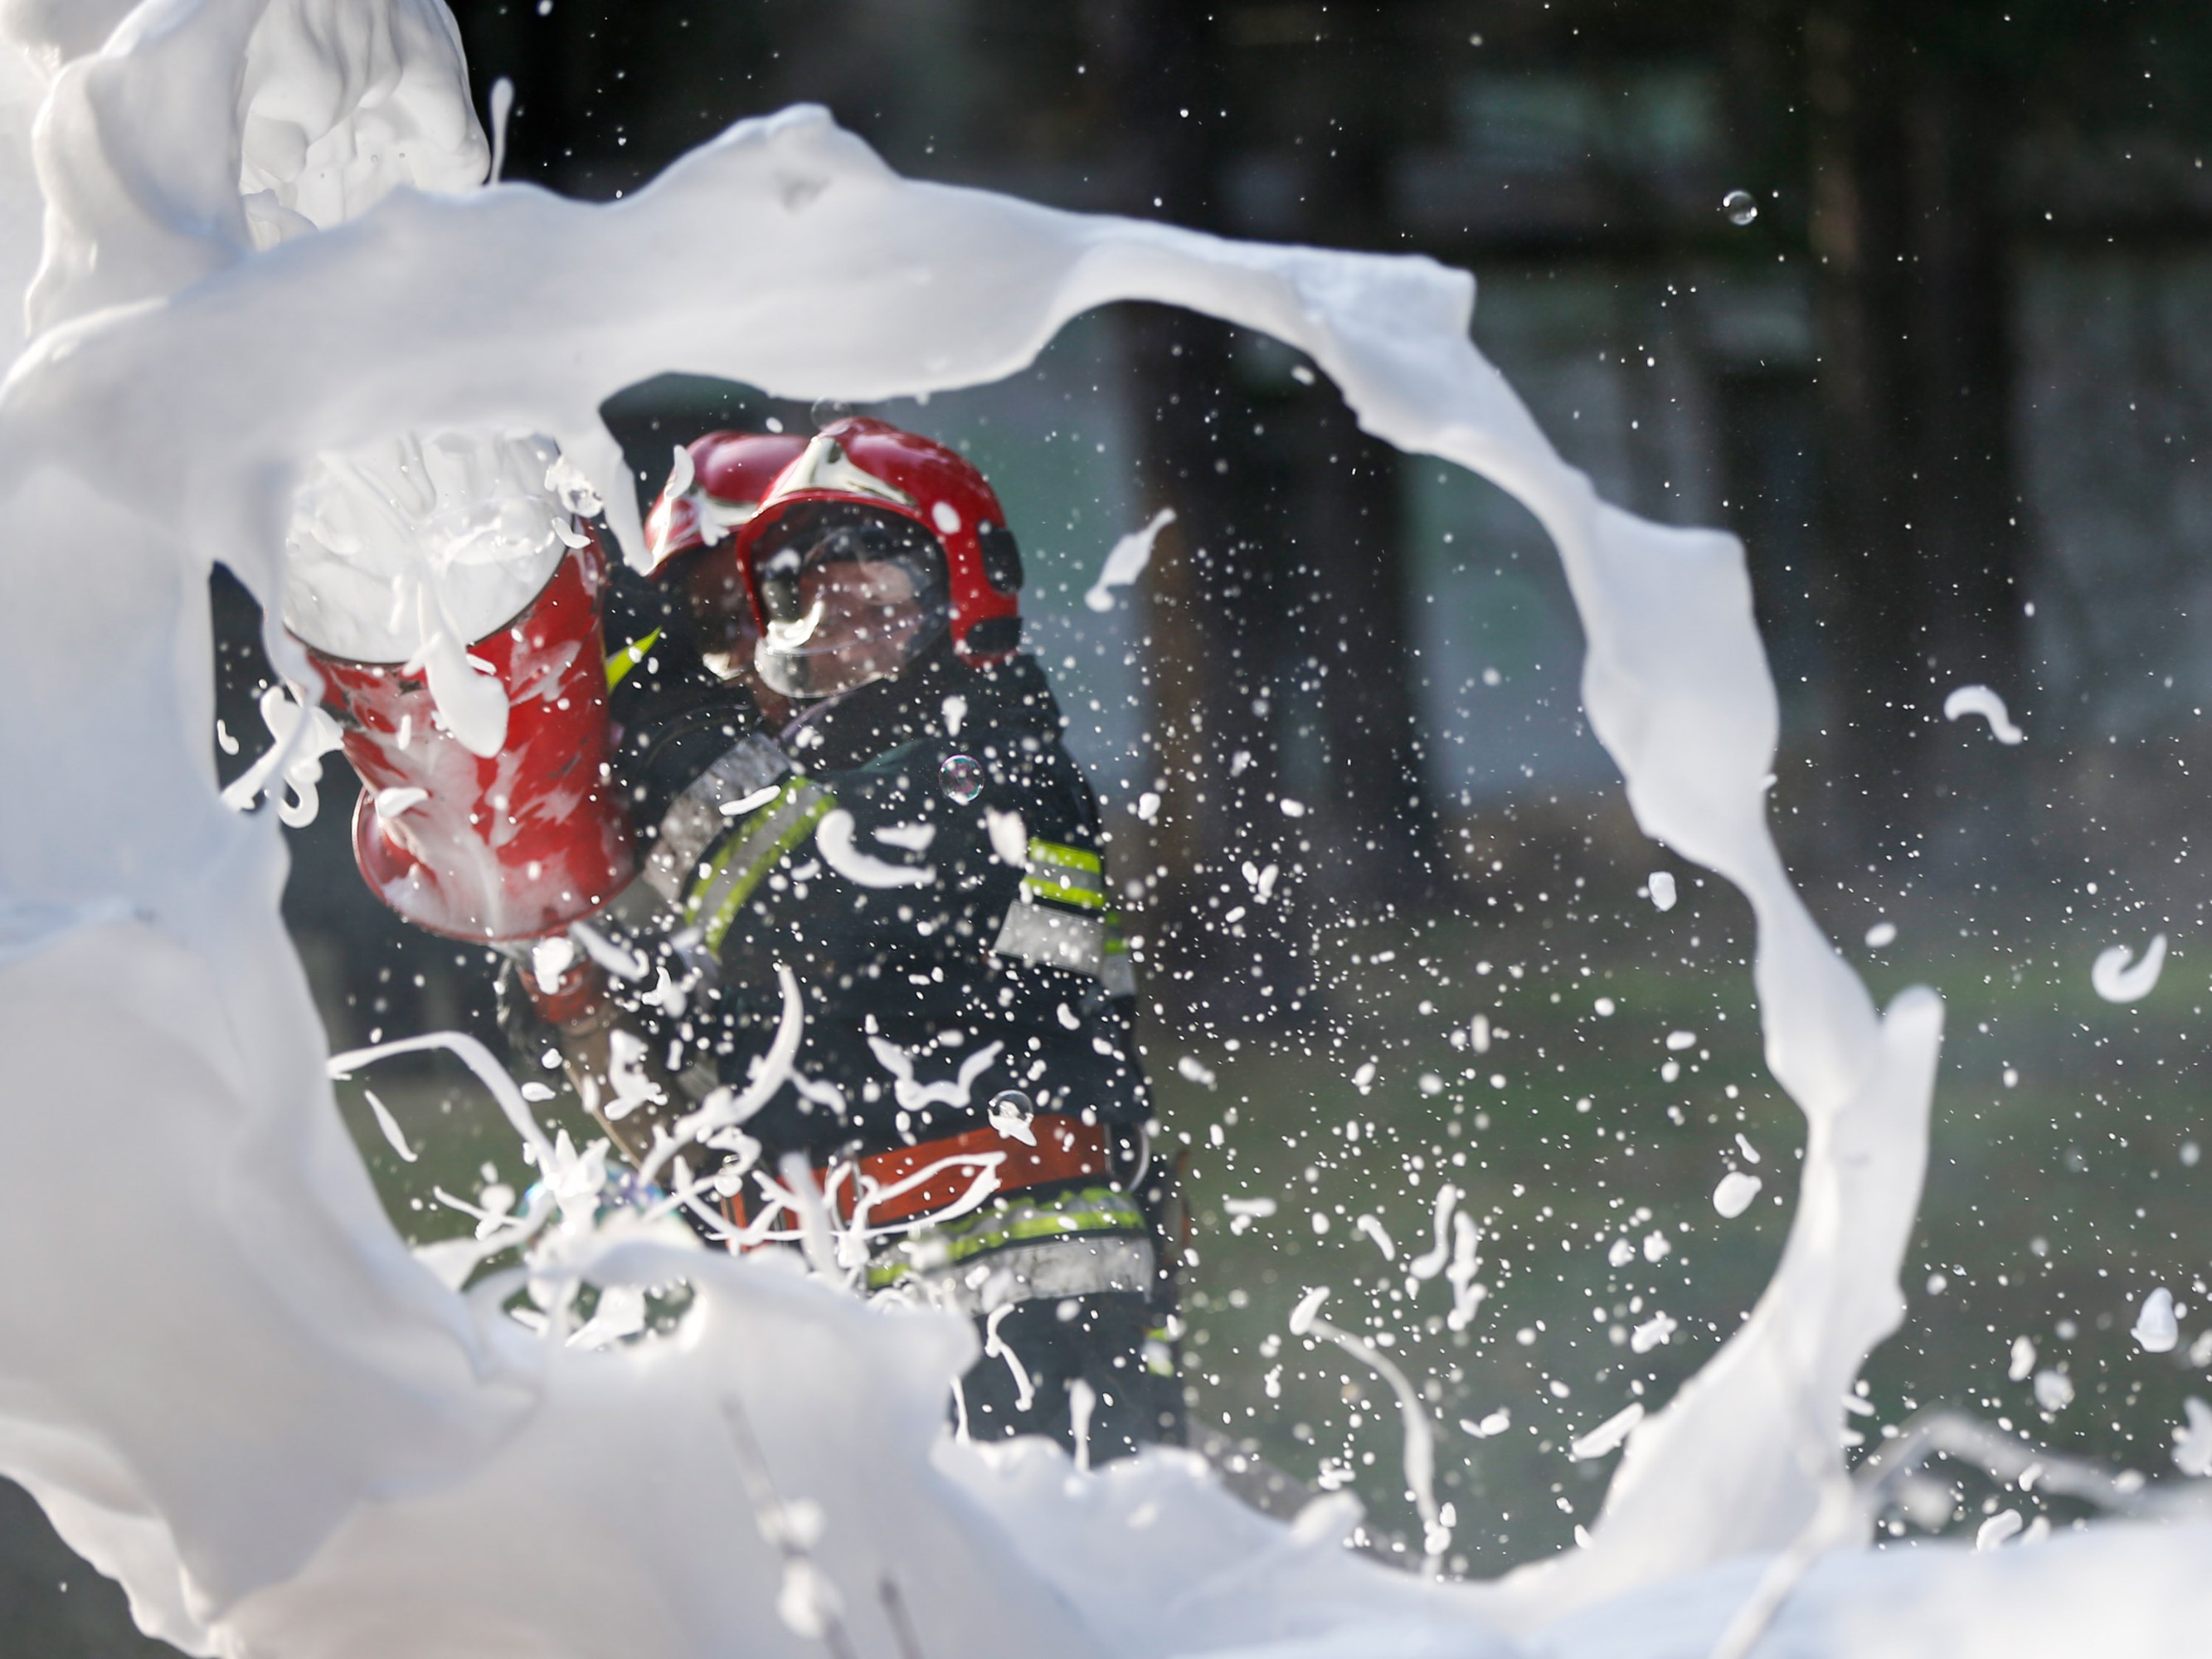 foam from a firefighter's extinguisher spraying toward the camera